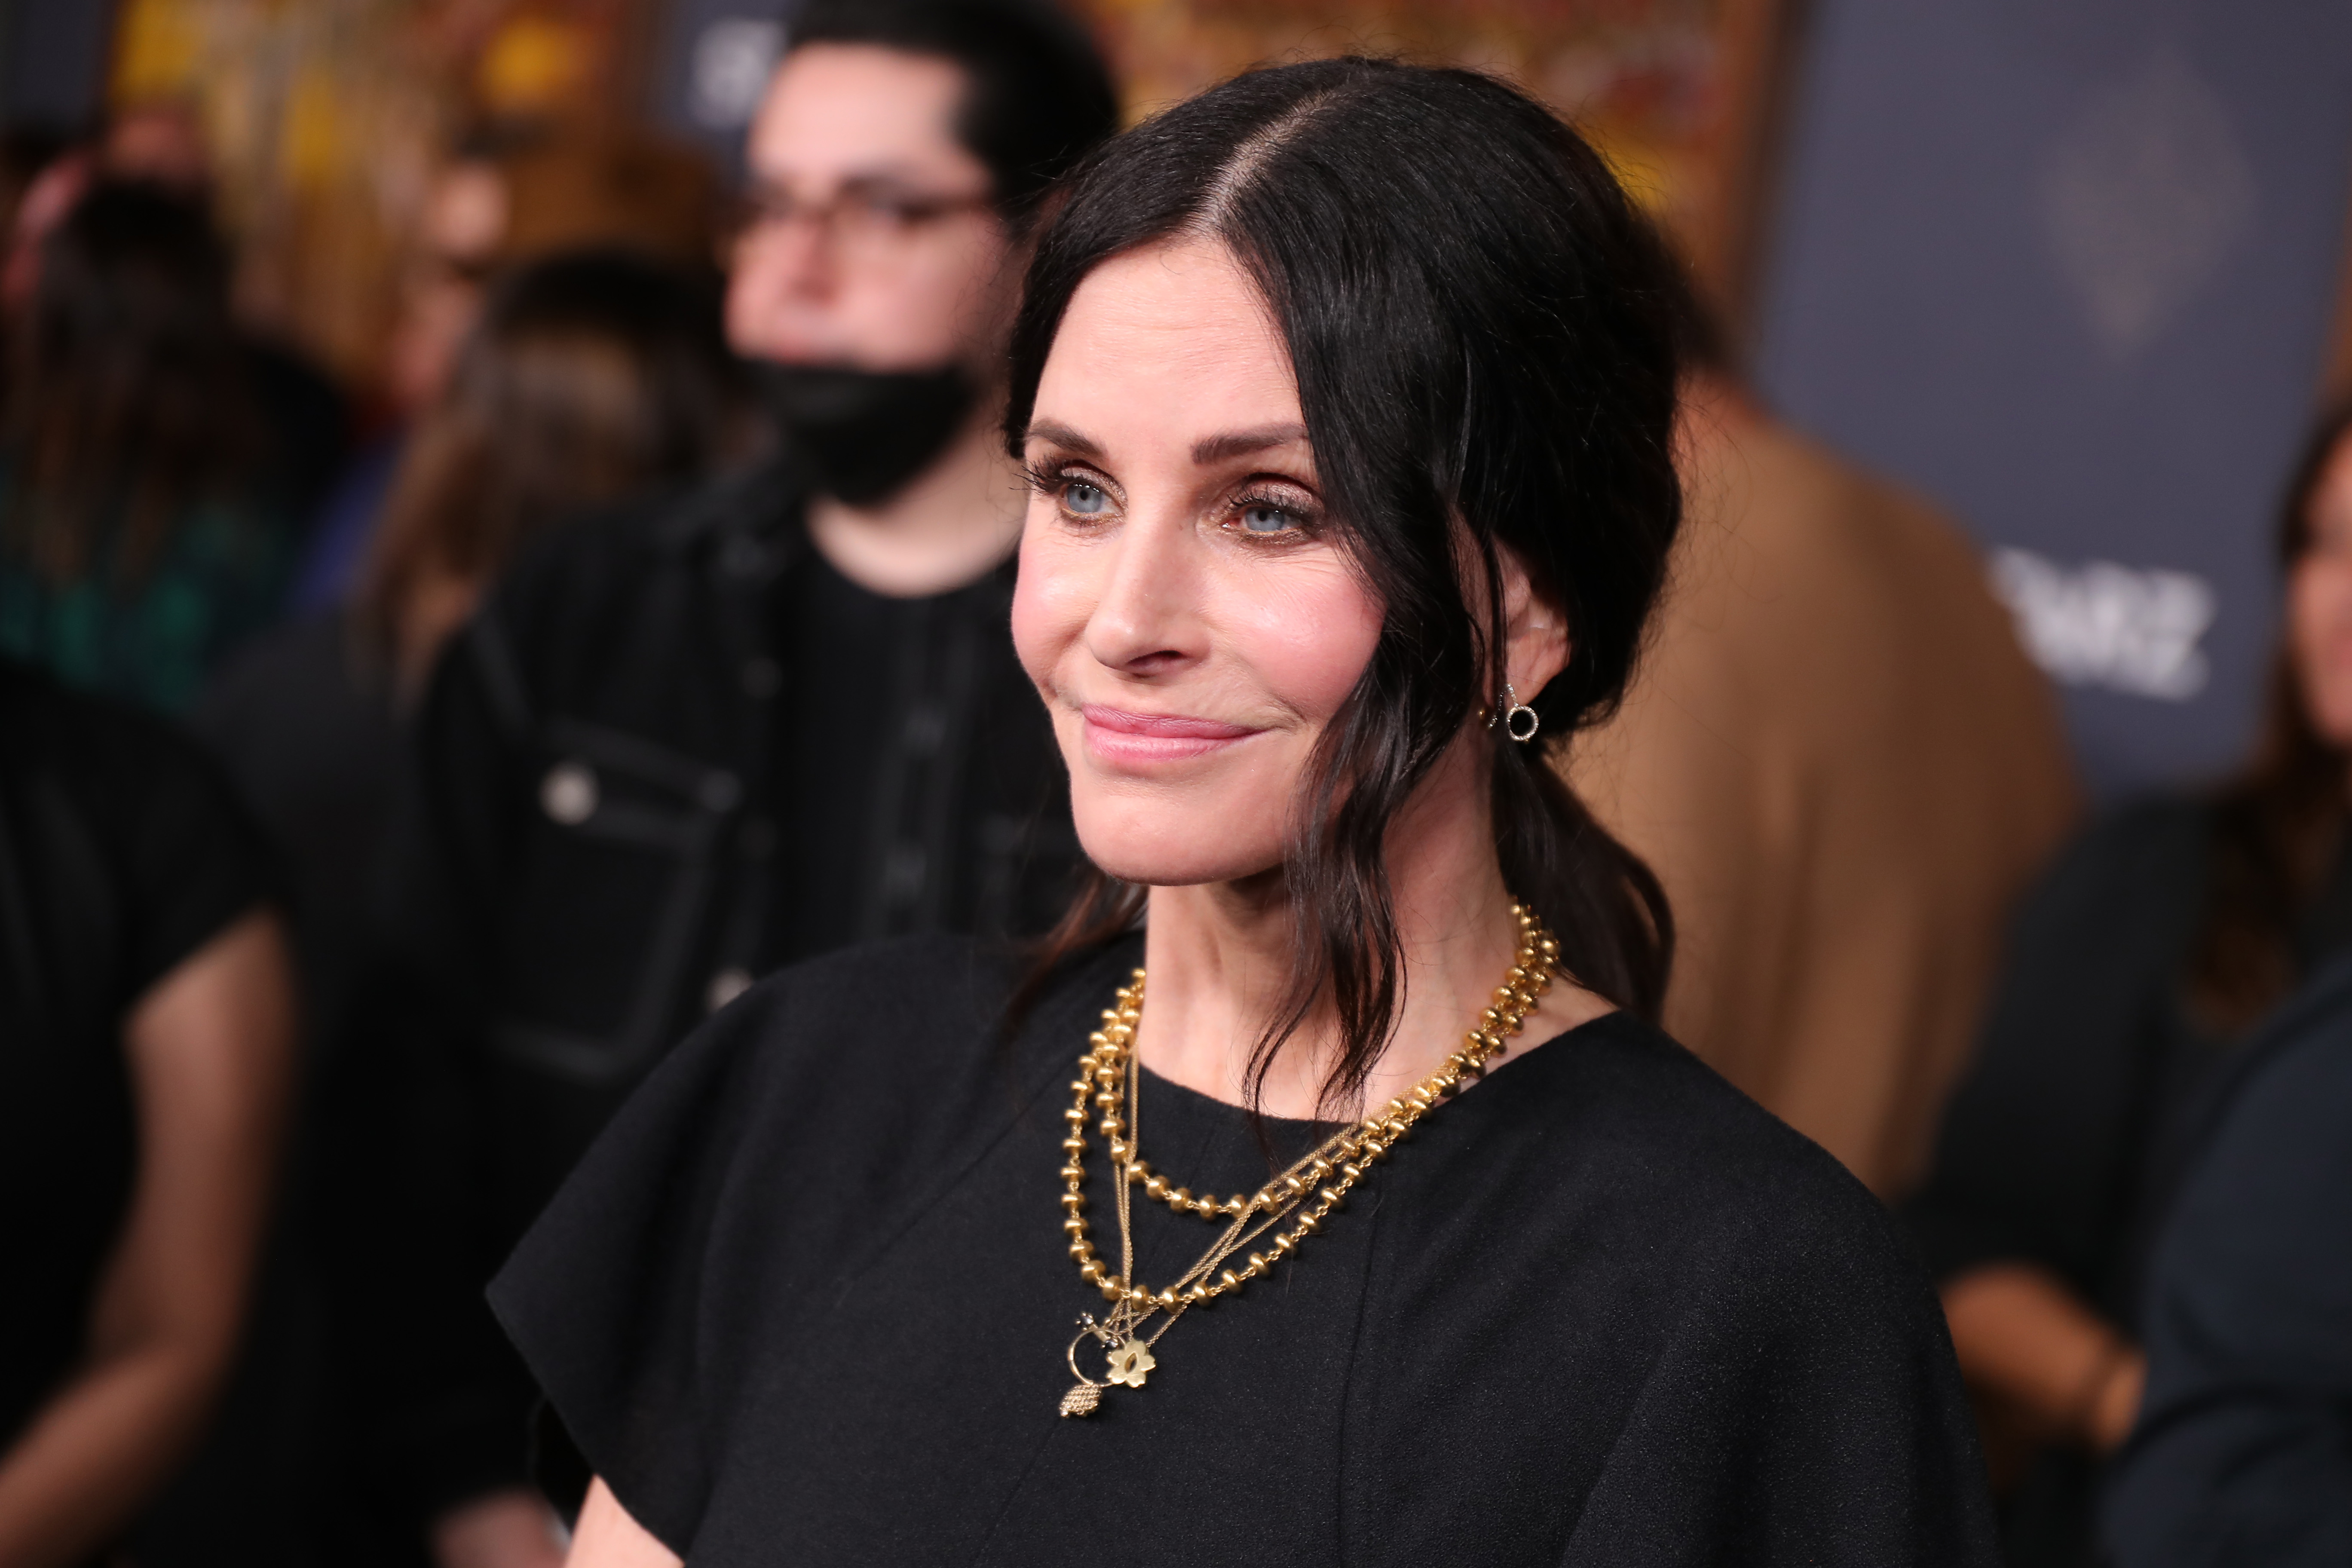 Courteney Cox attends premiere of STARZ "Shining Vale" - red carpet at TCL Chinese Theatre in Hollywood, California on February 28, 2022. | Source: Getty Images